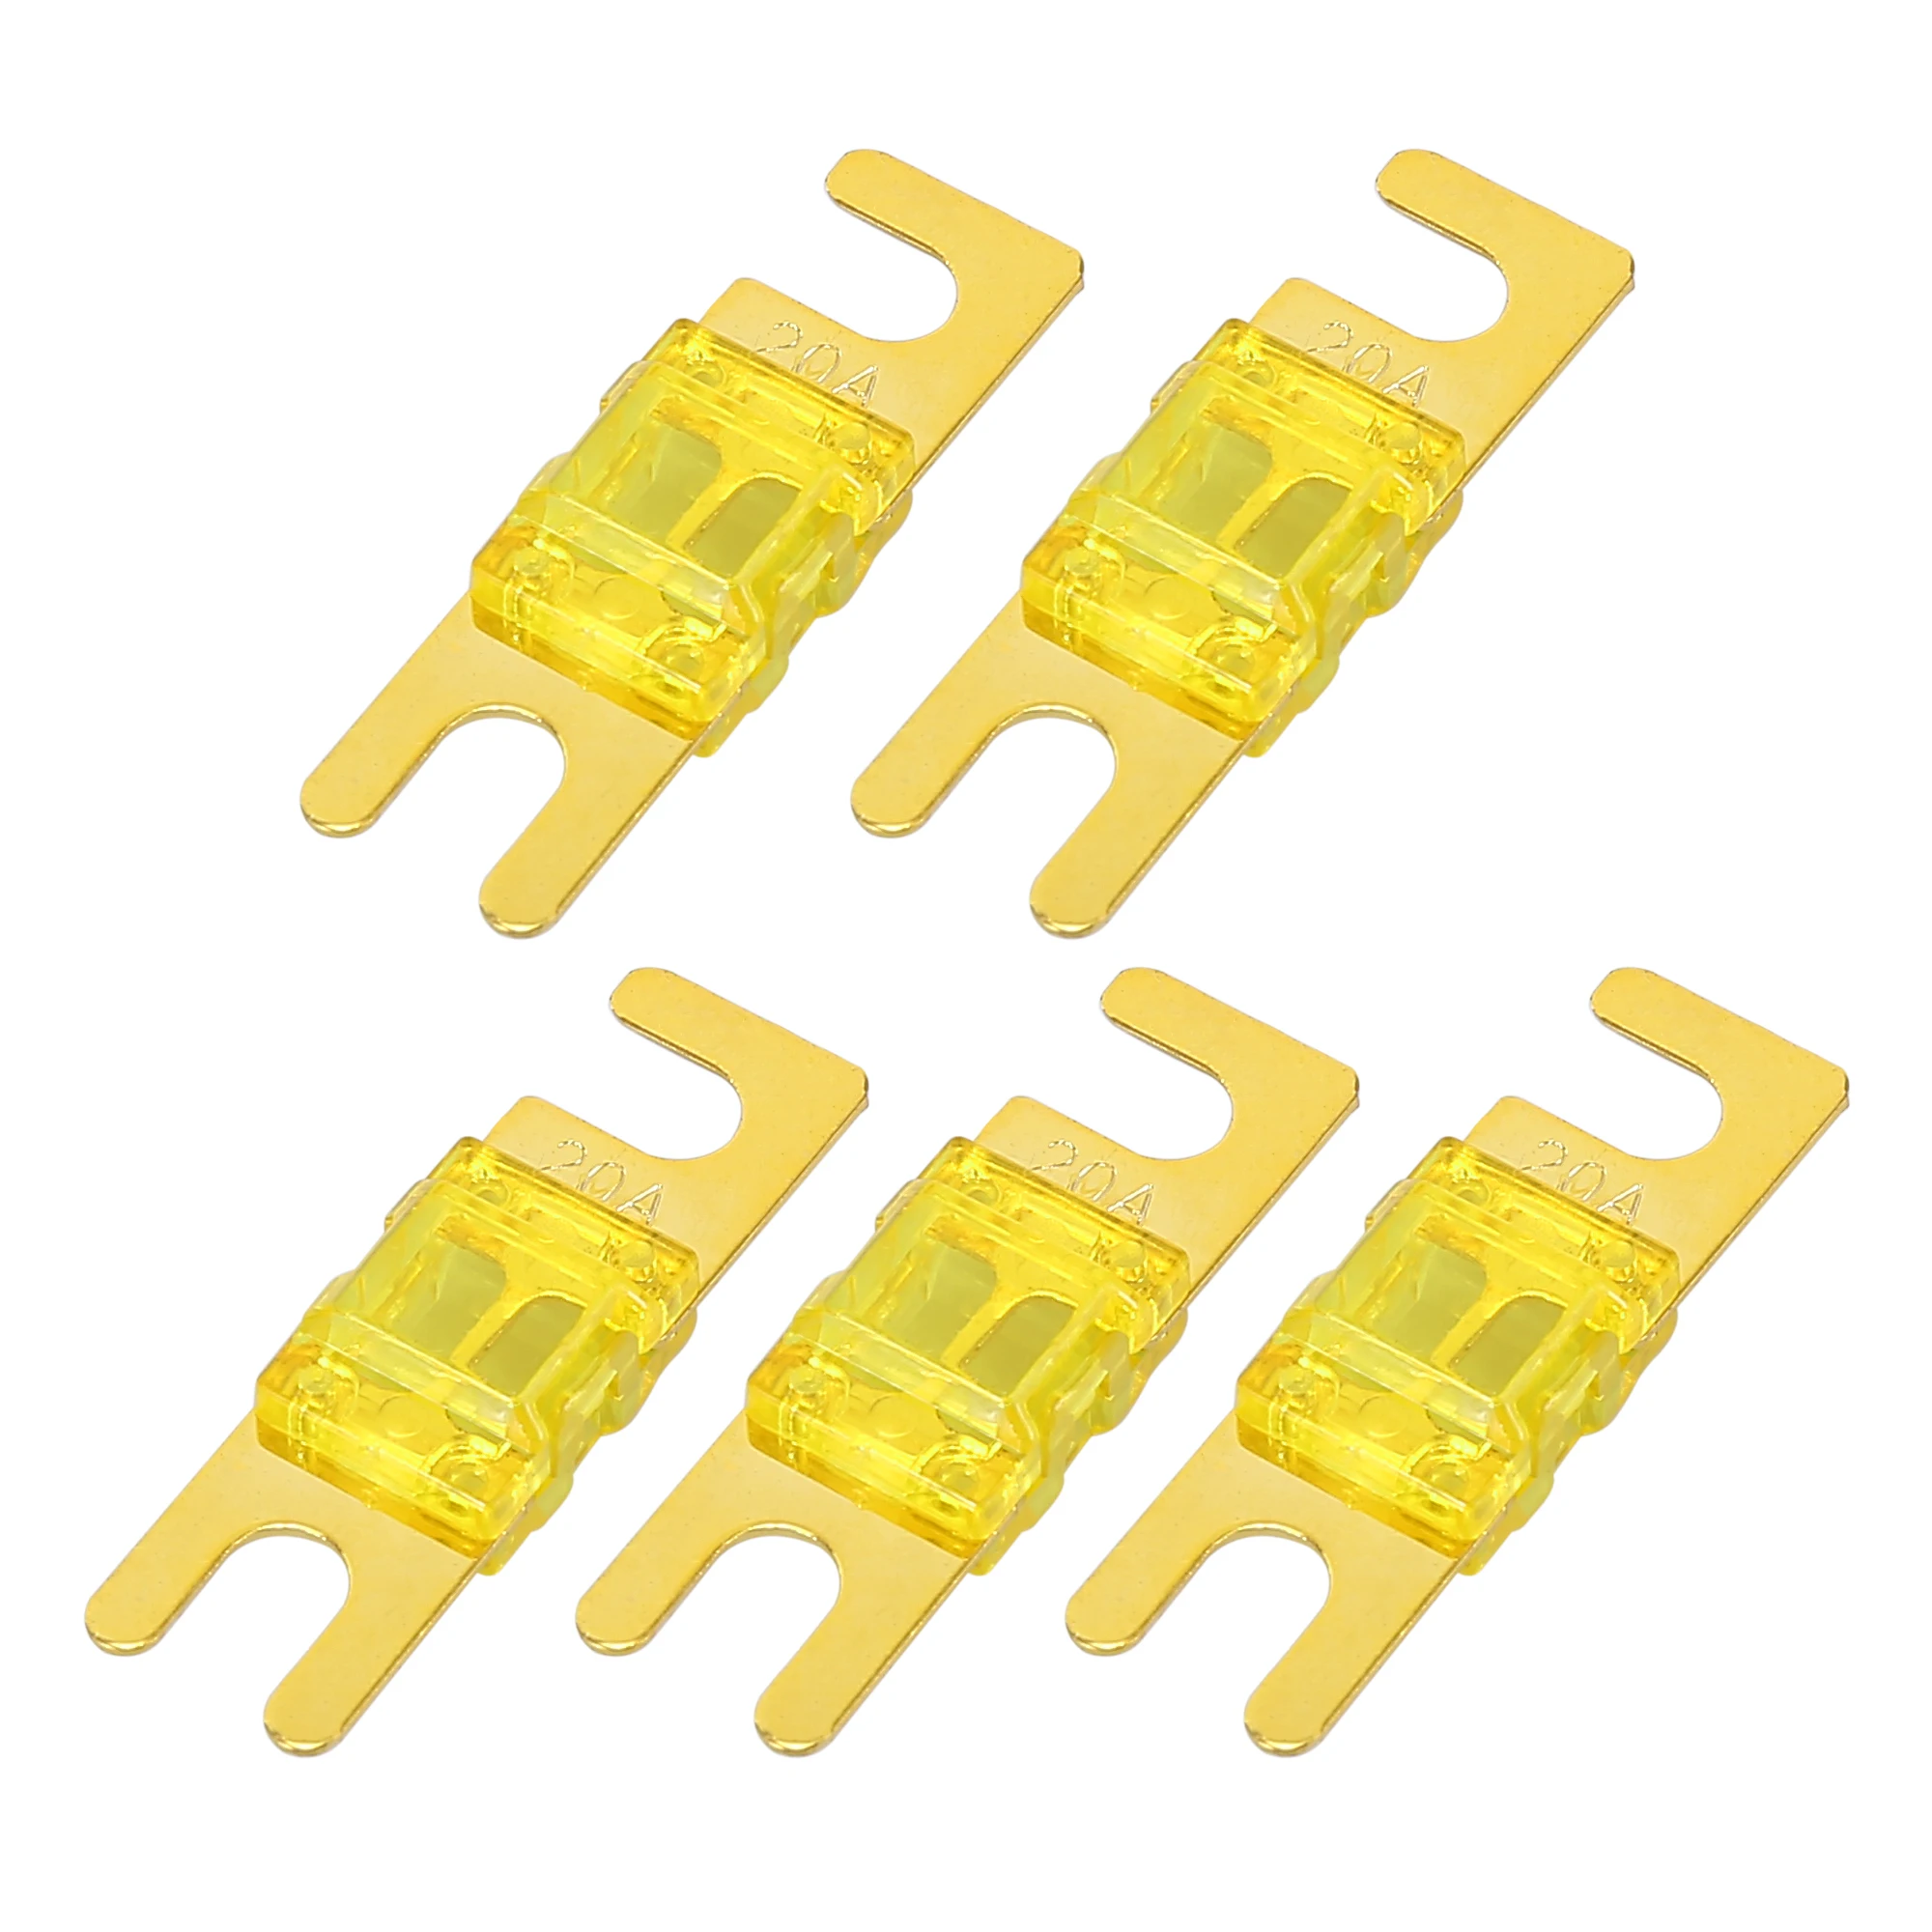 ANL Fuse 40A 40 Amp 32V Gold Plated Fuses For Auto Car Marine Stereo Audio Video 